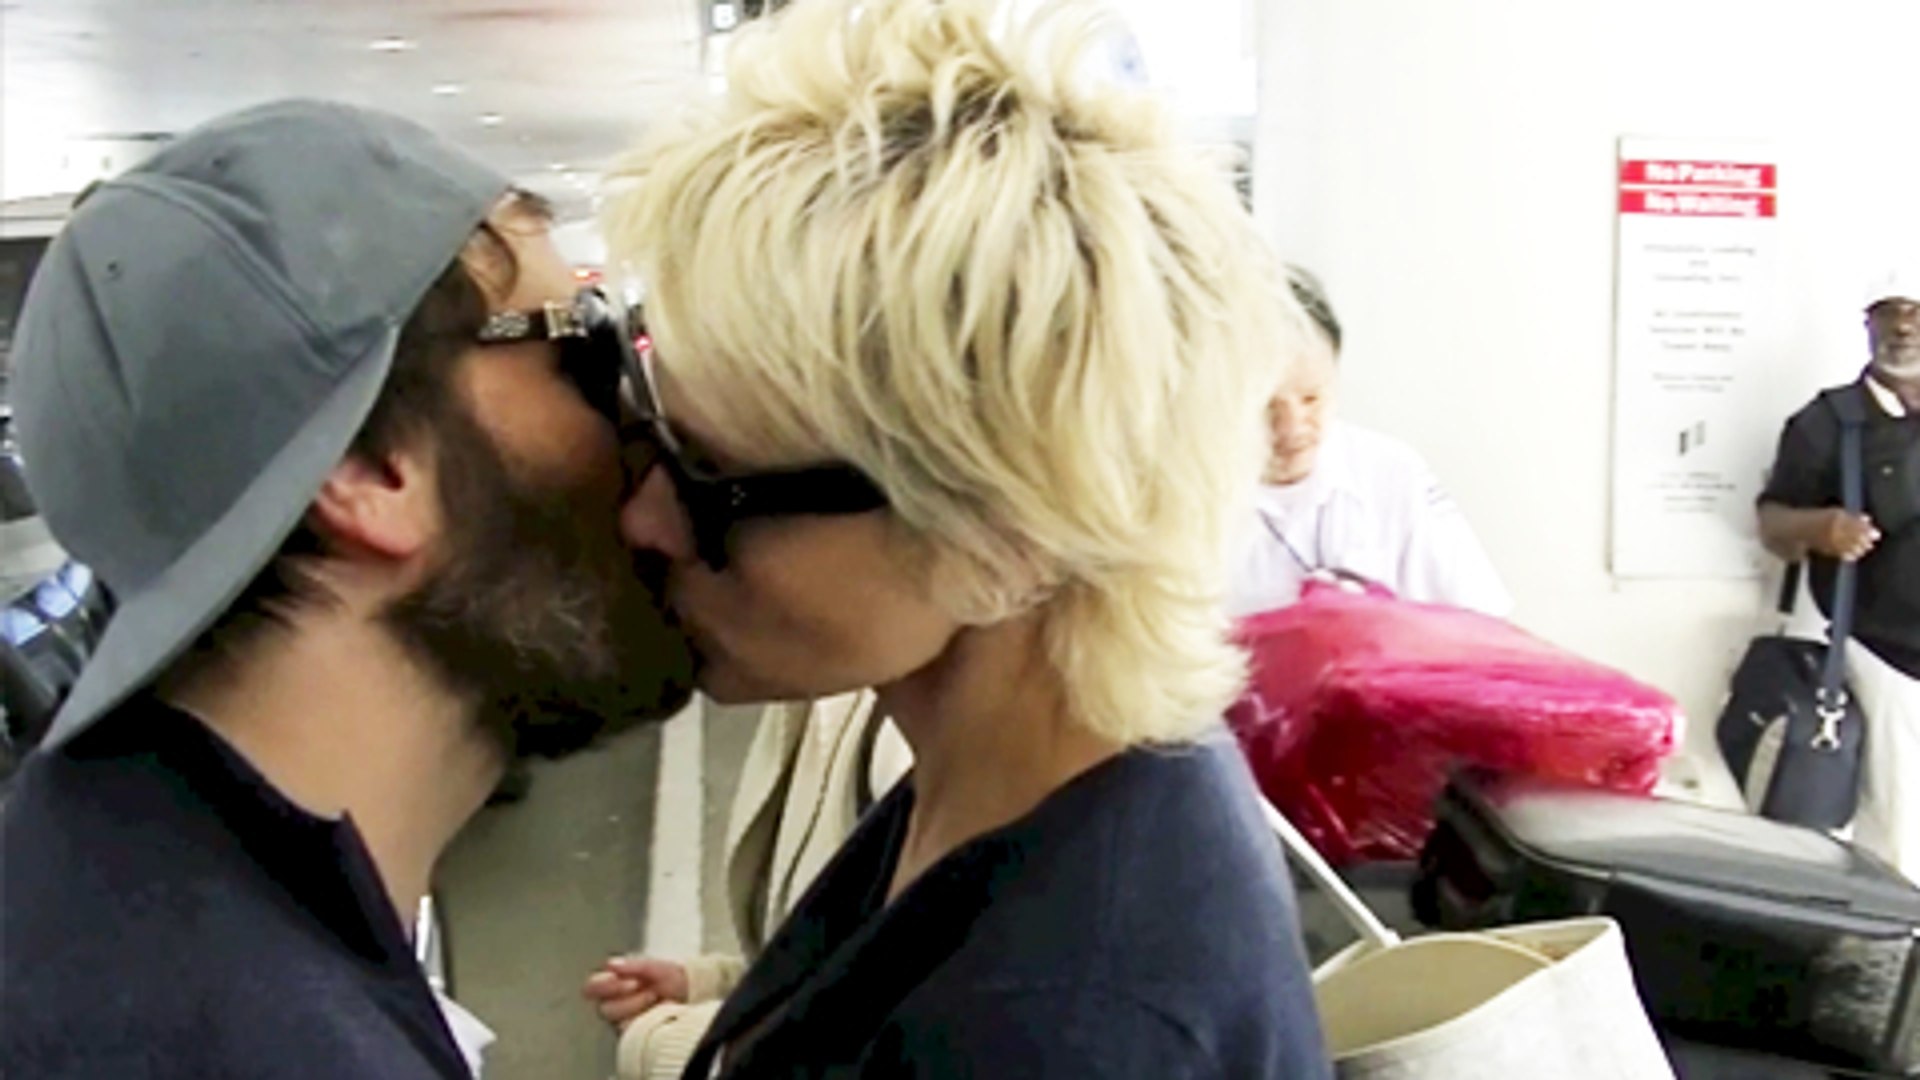 Intimate Pamela Anderson Kisses Boyfriend At Airport - video Dailymotion